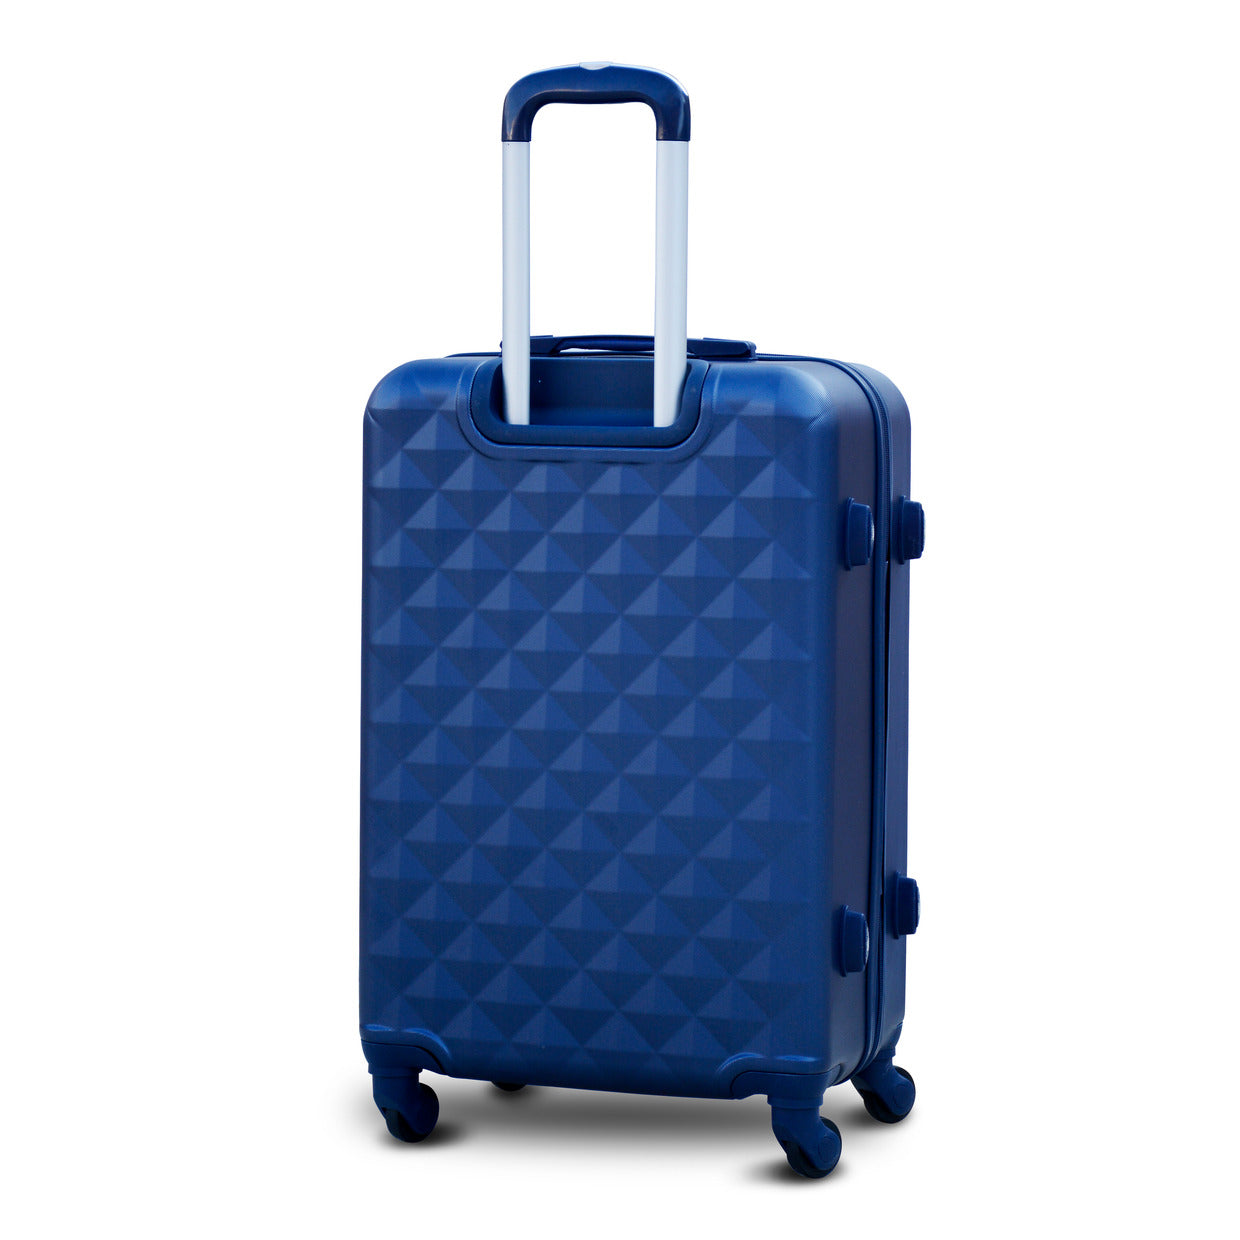 4 Piece Full Set 7" 20" 24" 28 Inches Blue Colour Diamond Cut ABS Lightweight Luggage Bag